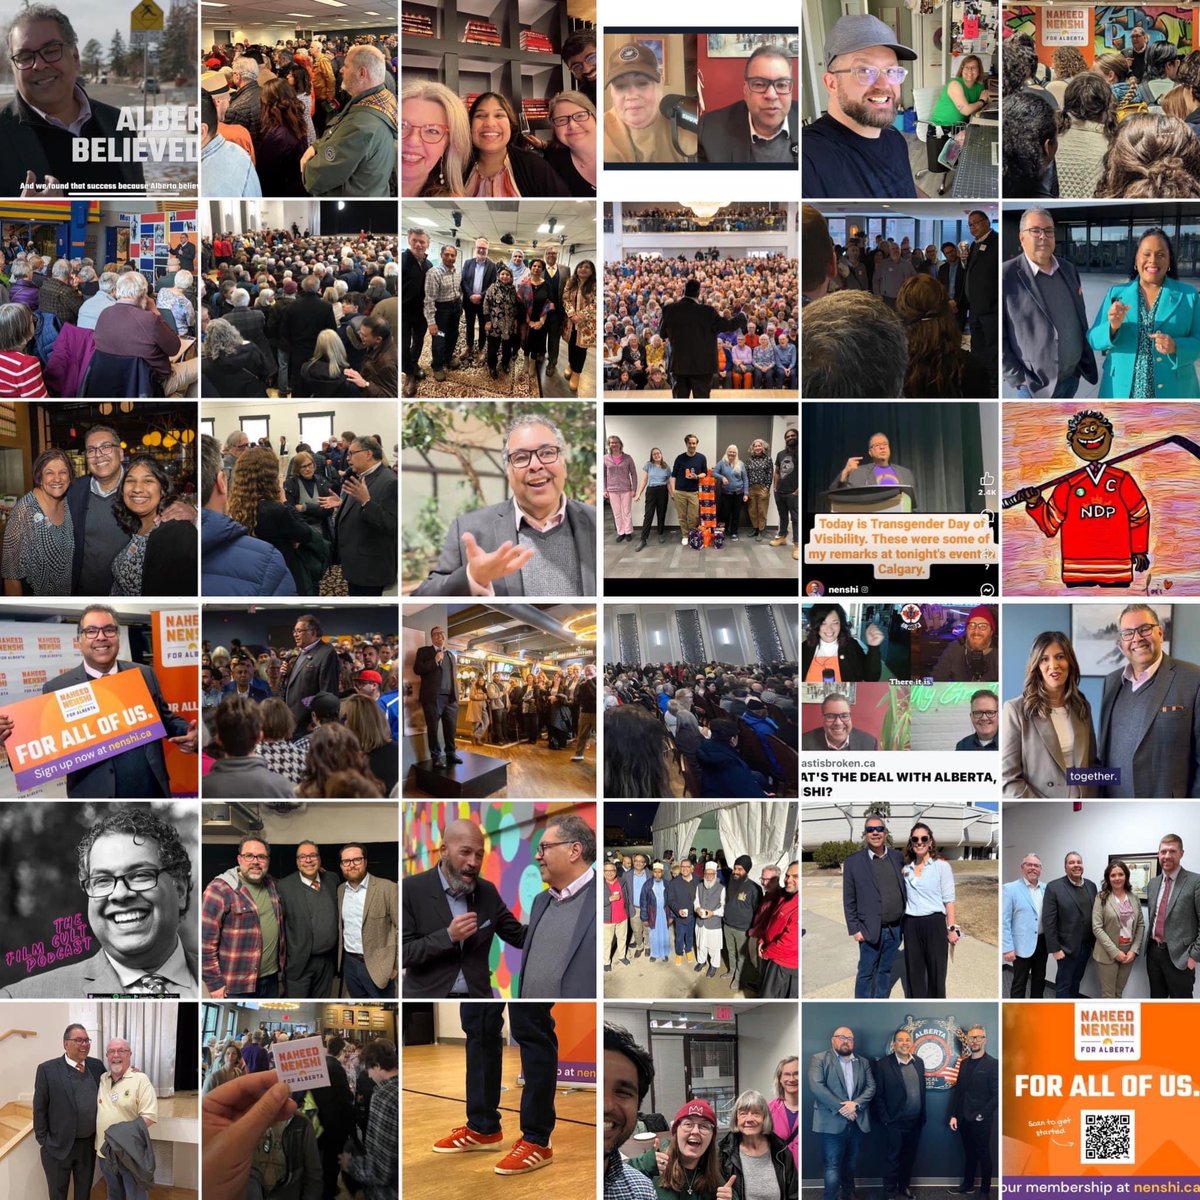 It's been 1 month! 1 amazingly hopeful month! Have you pledged your support & purchased your membership yet? Go to nenshi.ca 💜🧡 The deadline is April 22, an AB NDP membership is $10; Albertans 14 & older are eligible! #NenshiForAlberta #ForAllOfUs